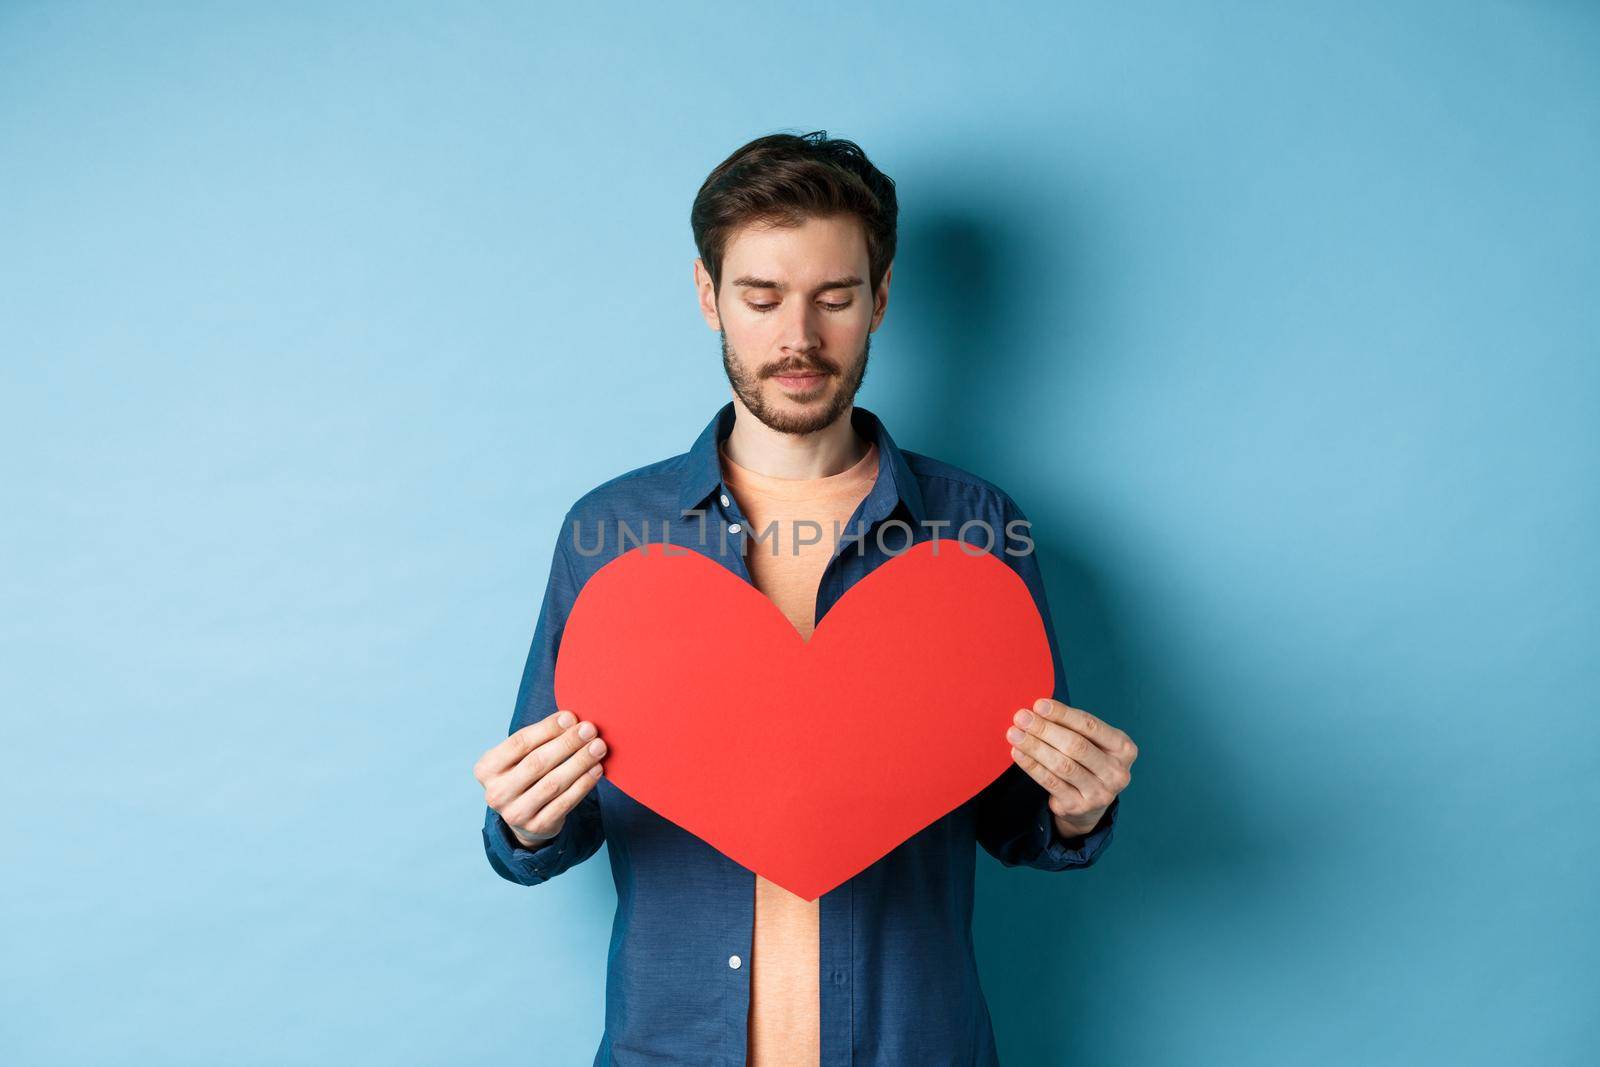 Lonely guy looking sad at valentines red heart with sad face, standing over blue background.